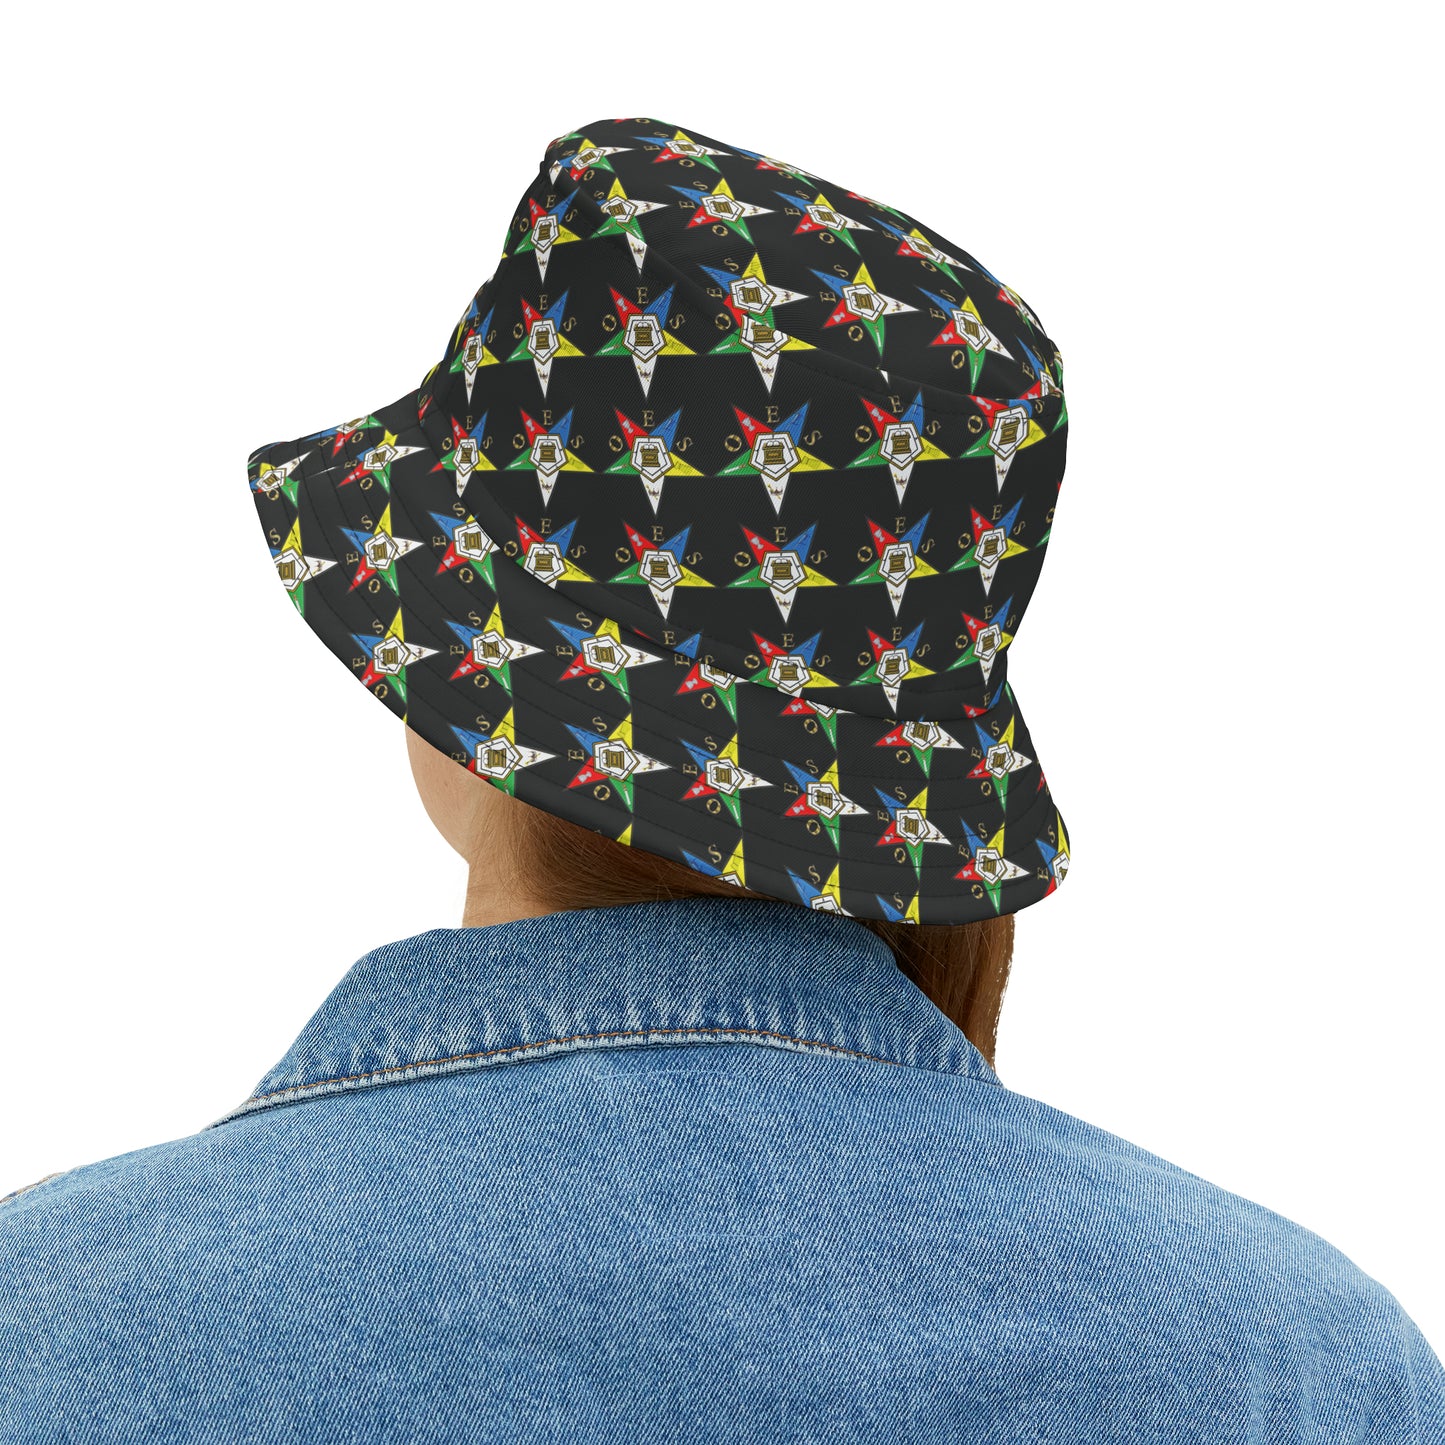 Eastern Star All Over Print Bucket Hat